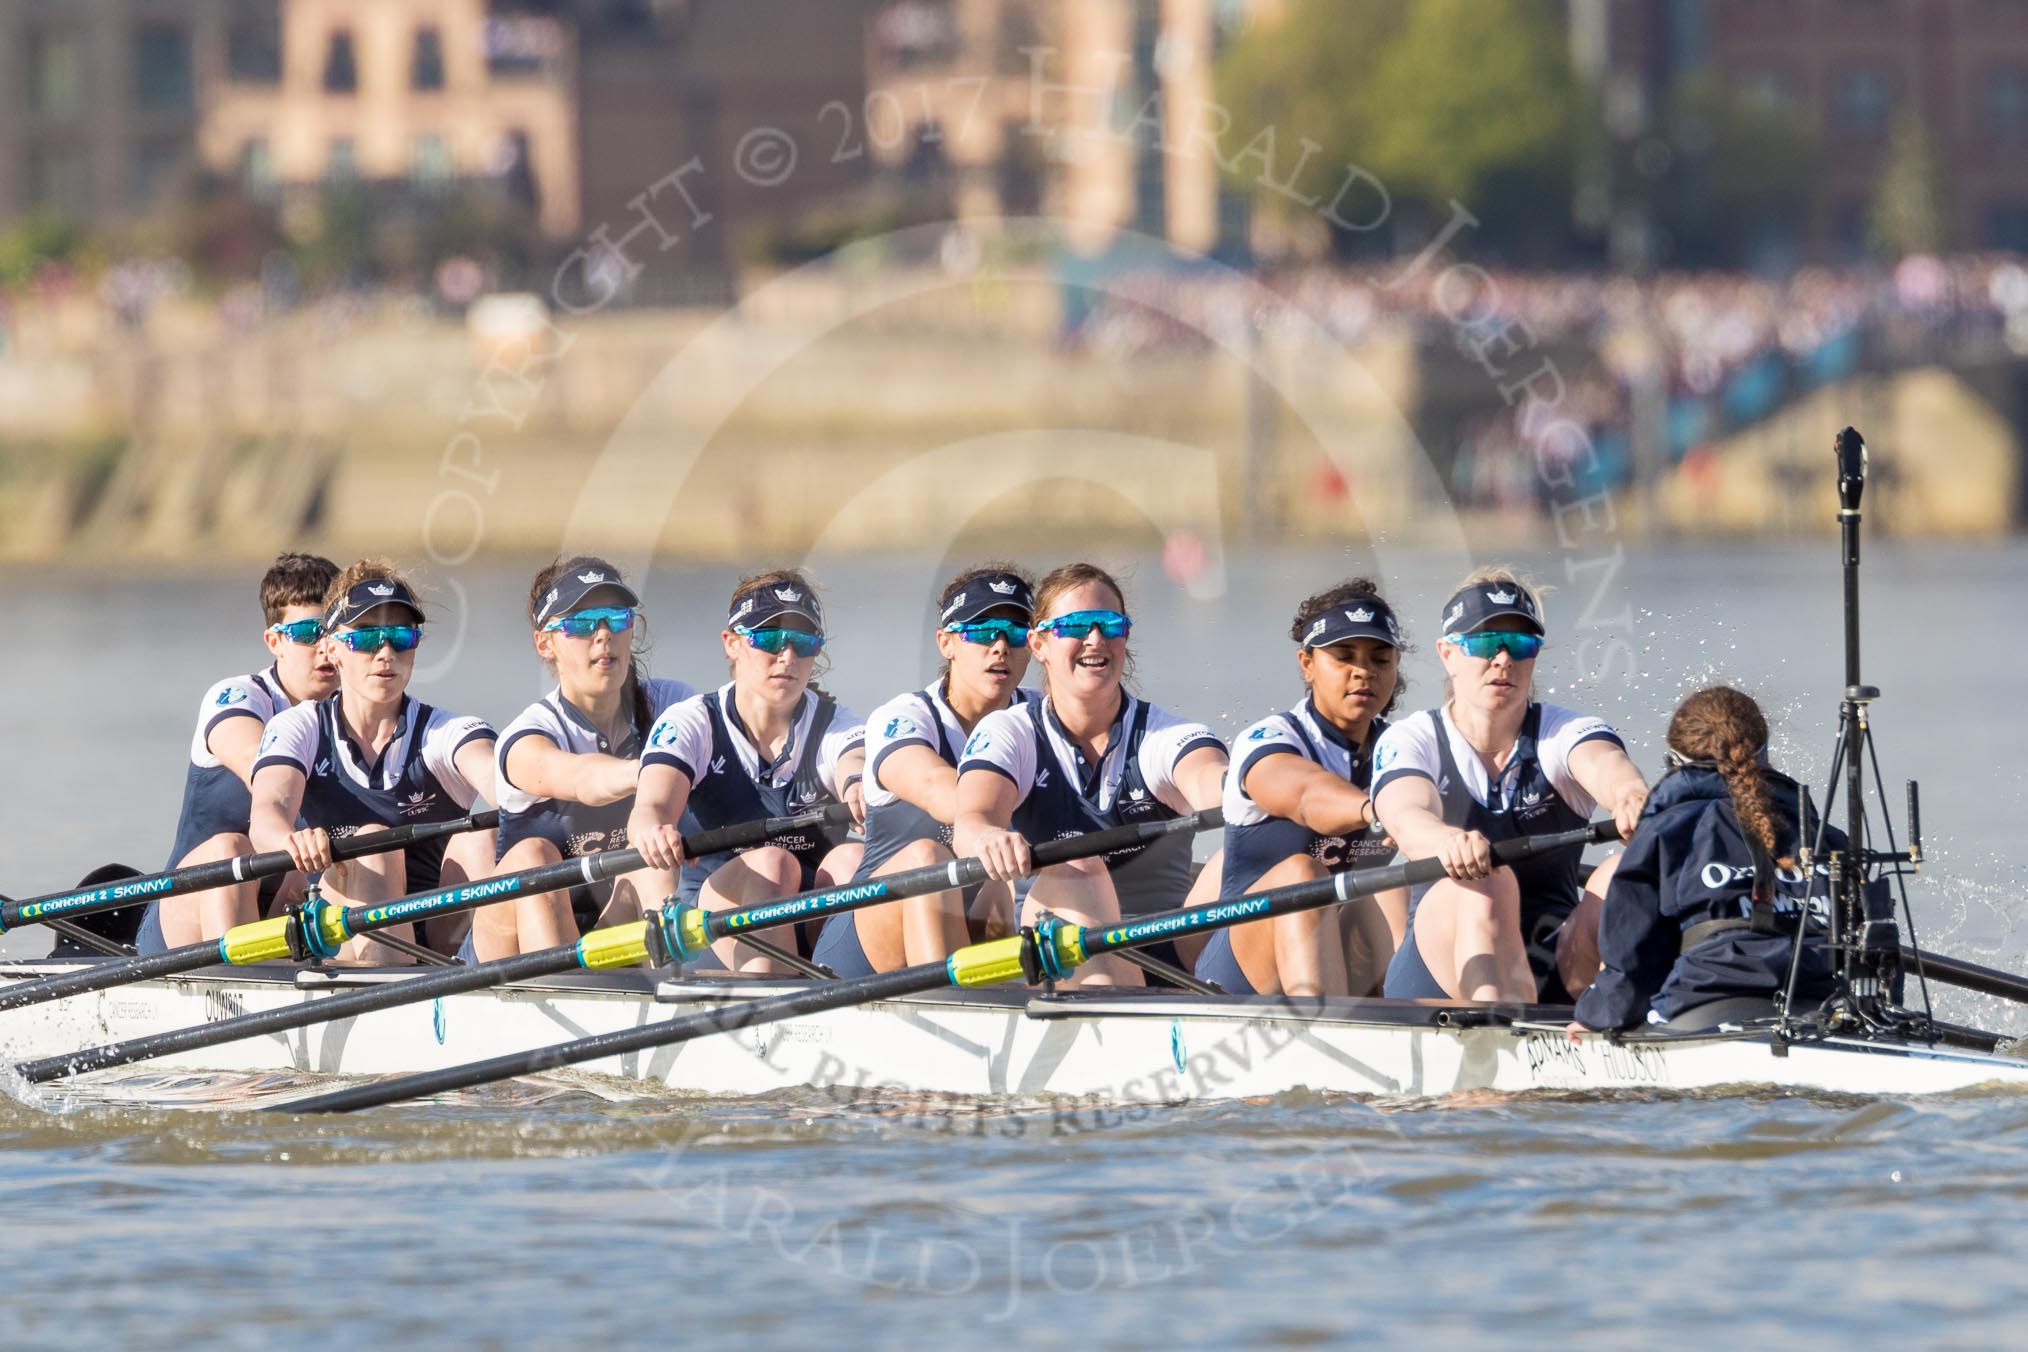 The Boat Race season 2017 -  The Cancer Research Women's Boat Race: OUWBC working hard to catch up with Cambridge, here bow Alice Roberts, 2 Flo Pickles, 3 Rebecca Te Water Naudé, 4 Rebecca Esselstein, 5 Chloe Laverack, 6 Harriet Austin, 7 Jenna Hebert, stroke Emily Cameron, cox Eleanor Shearer.
River Thames between Putney Bridge and Mortlake,
London SW15,

United Kingdom,
on 02 April 2017 at 16:38, image #140